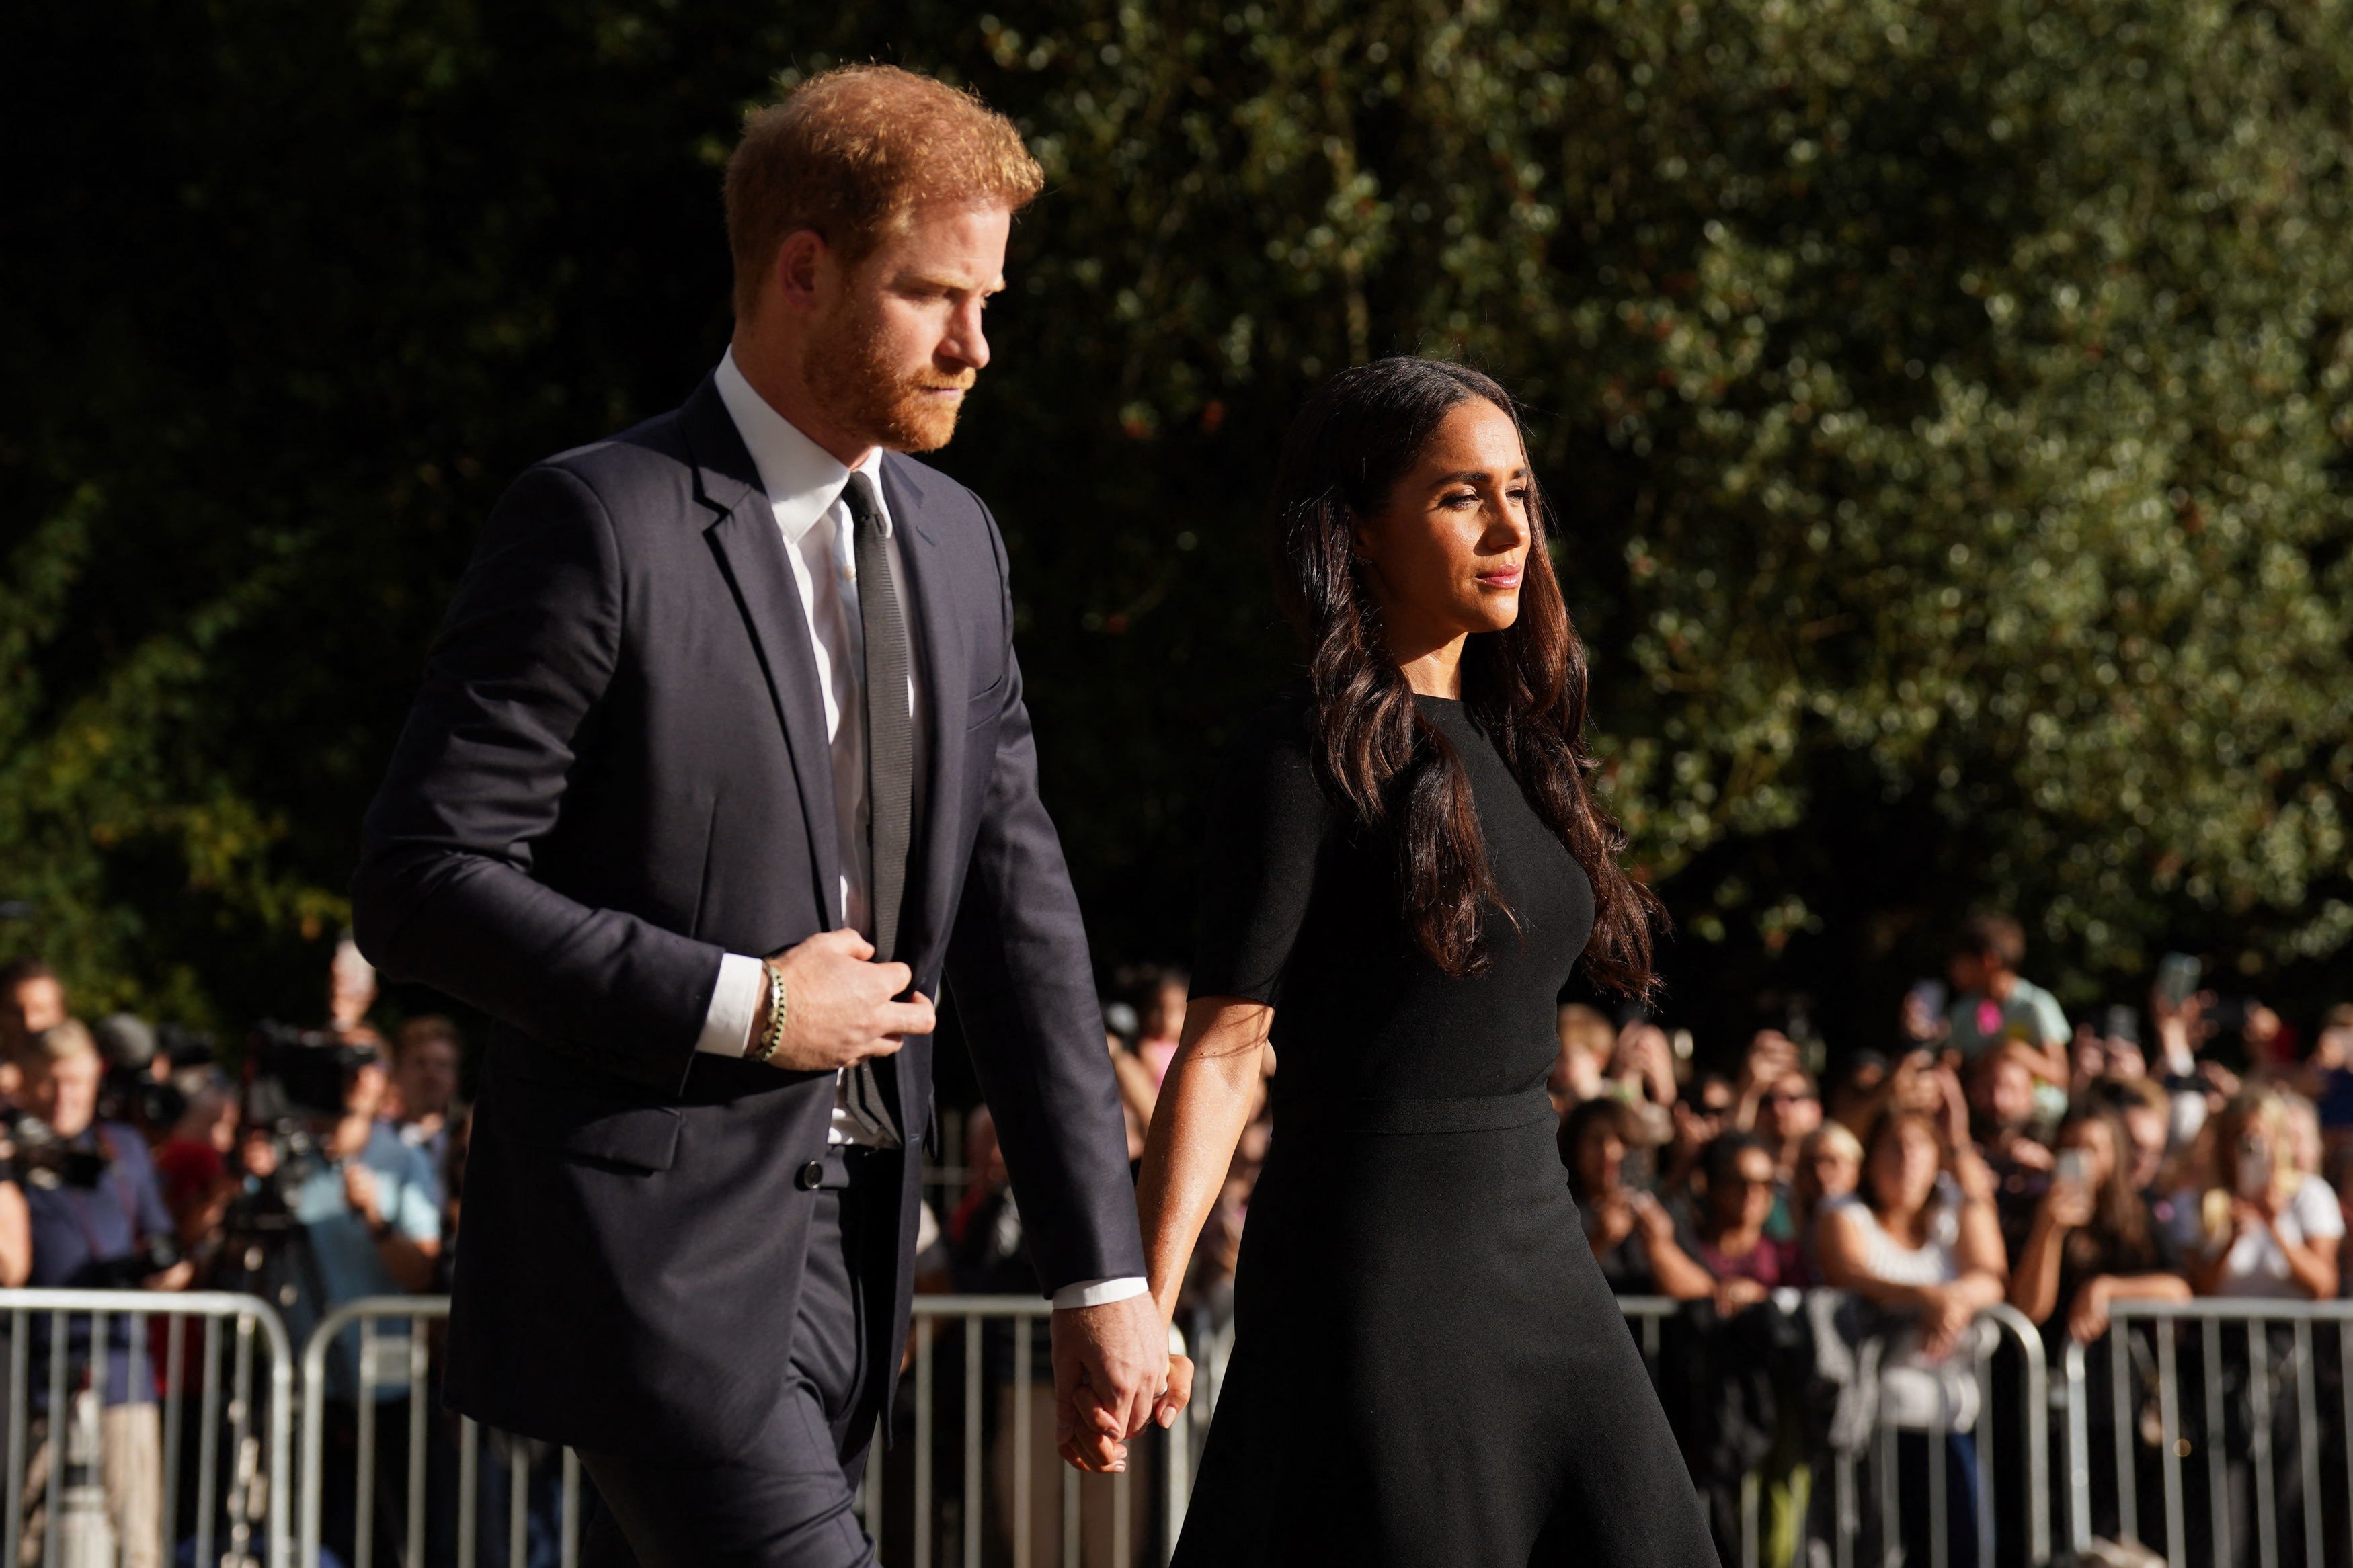 Prince Harry, Duke of Sussex and Meghan, Duchess of Sussex arrive to look at floral tributes on the Long walk at Windsor Castle on September 10, 2022 | Source: Getty Images